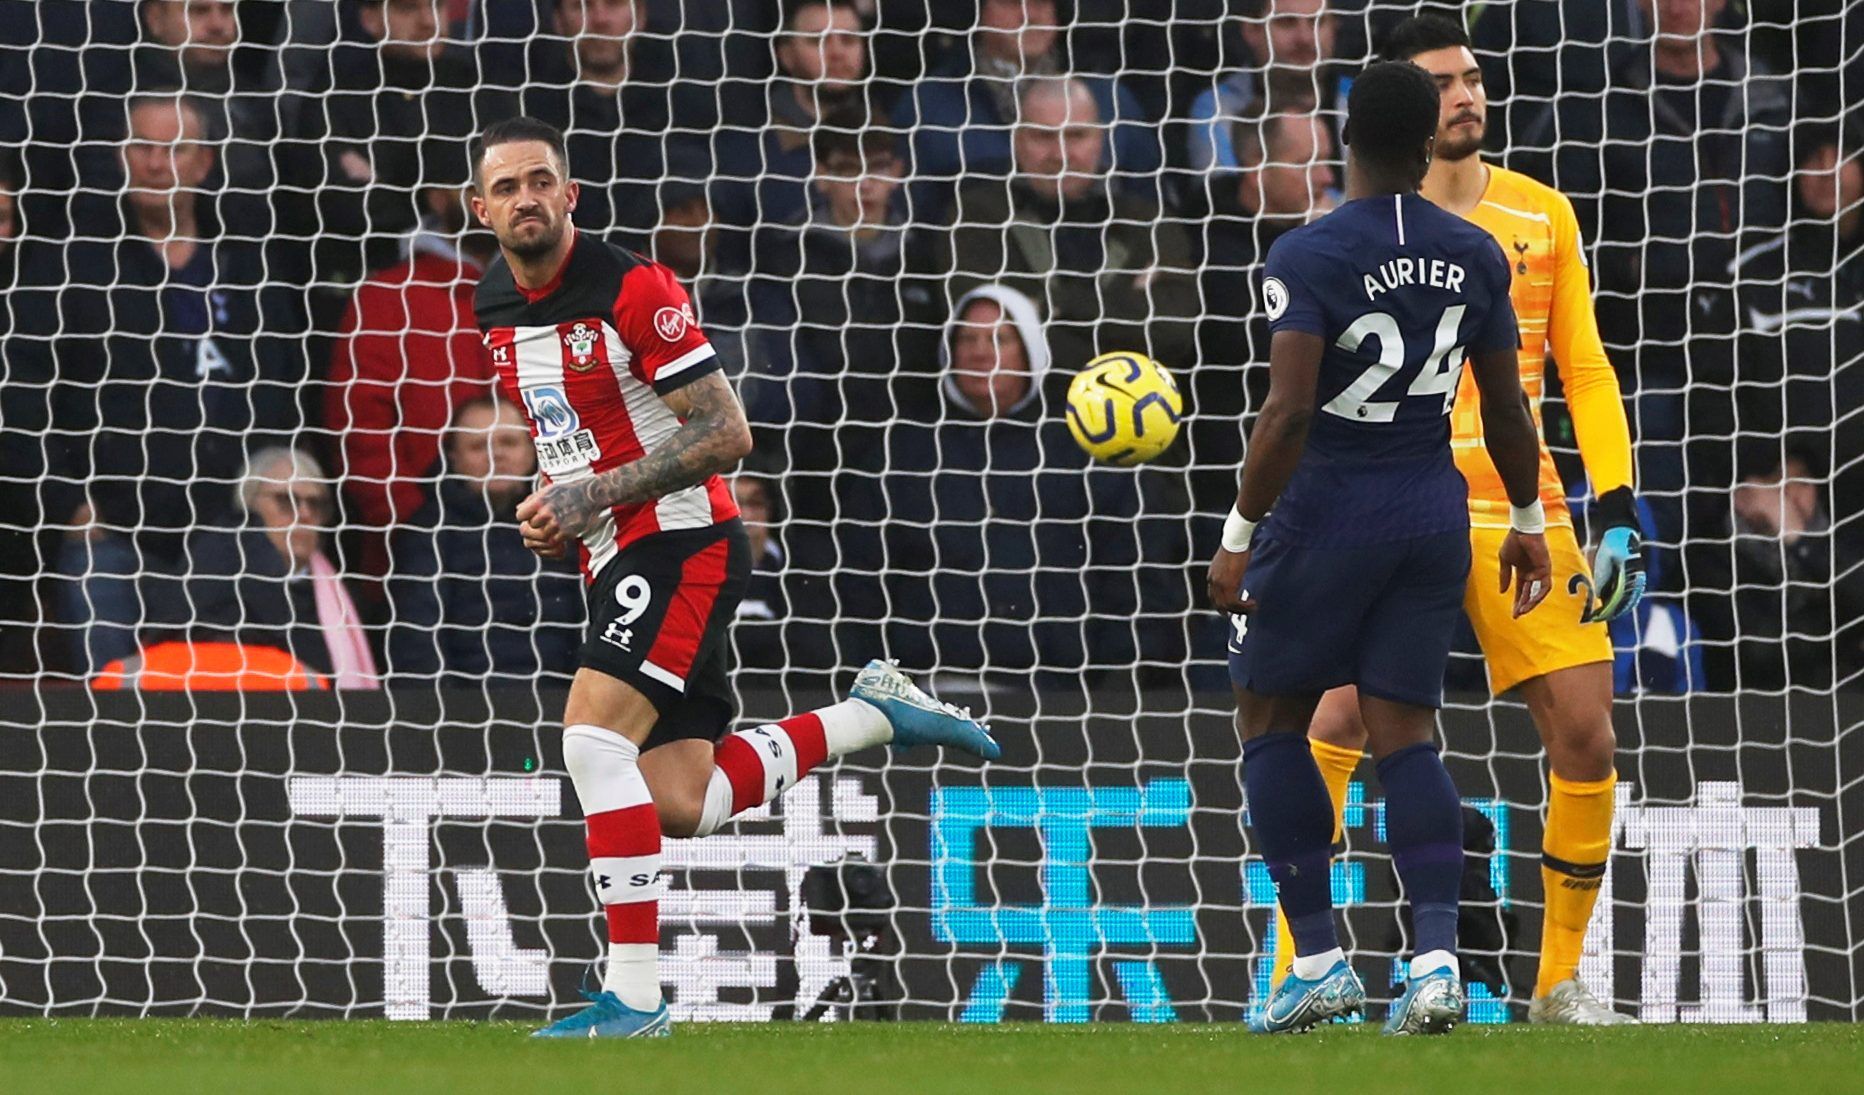 Soccer Football - Premier League - Southampton v Tottenham Hotspur - St Mary's Stadium, Southampton, Britain - January 1, 2020  Southampton's Danny Ings celebrates scoring their first goal      Action Images via Reuters/Paul Childs  EDITORIAL USE ONLY. No use with unauthorized audio, video, data, fixture lists, club/league logos or 